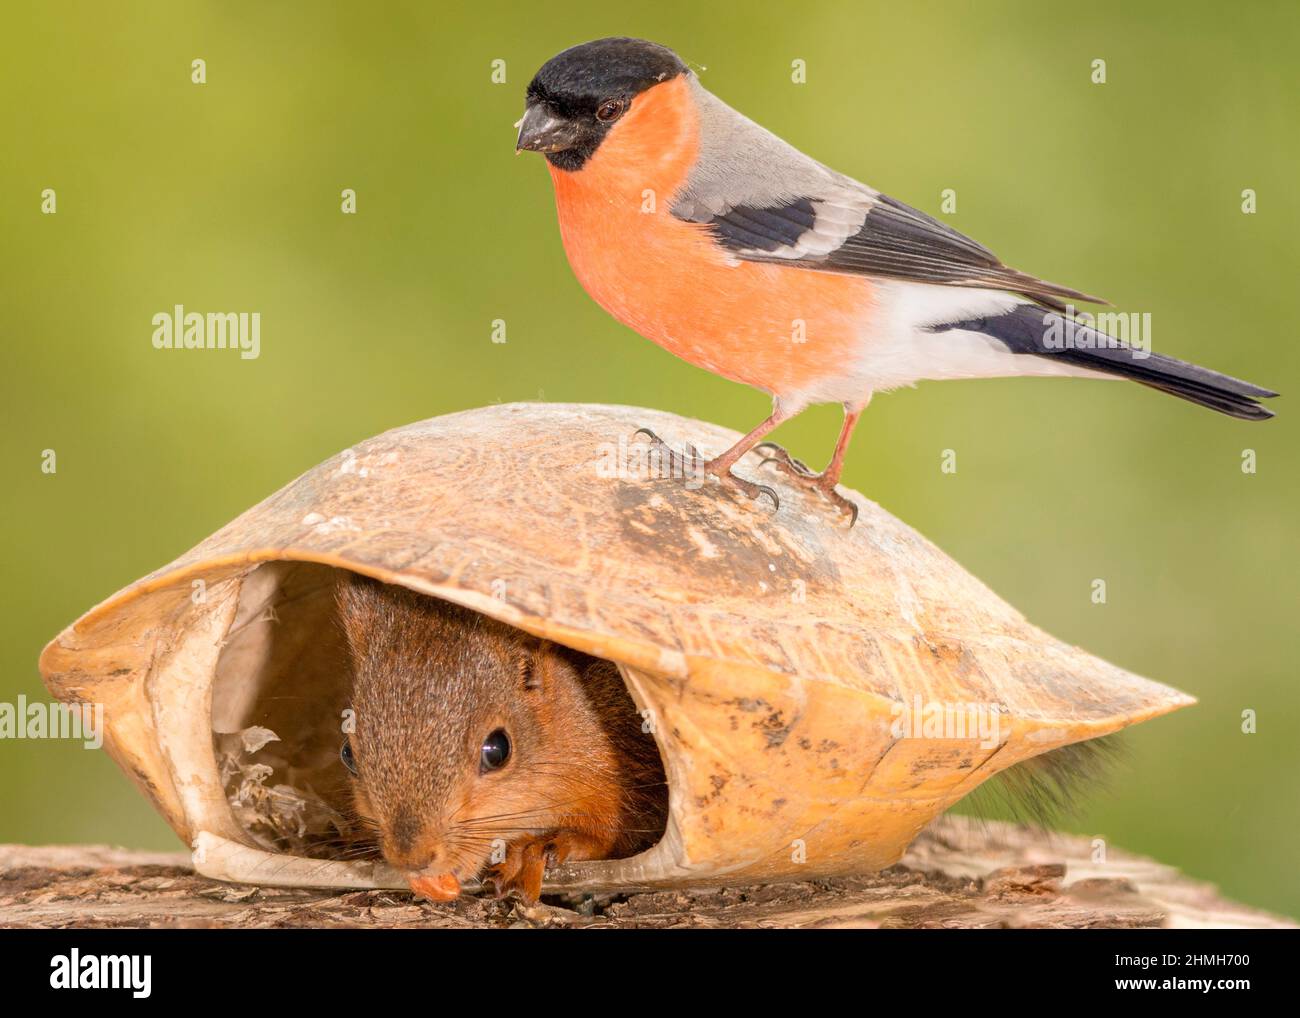 young red squirrel under turtle shell with bullfinch on it Stock Photo